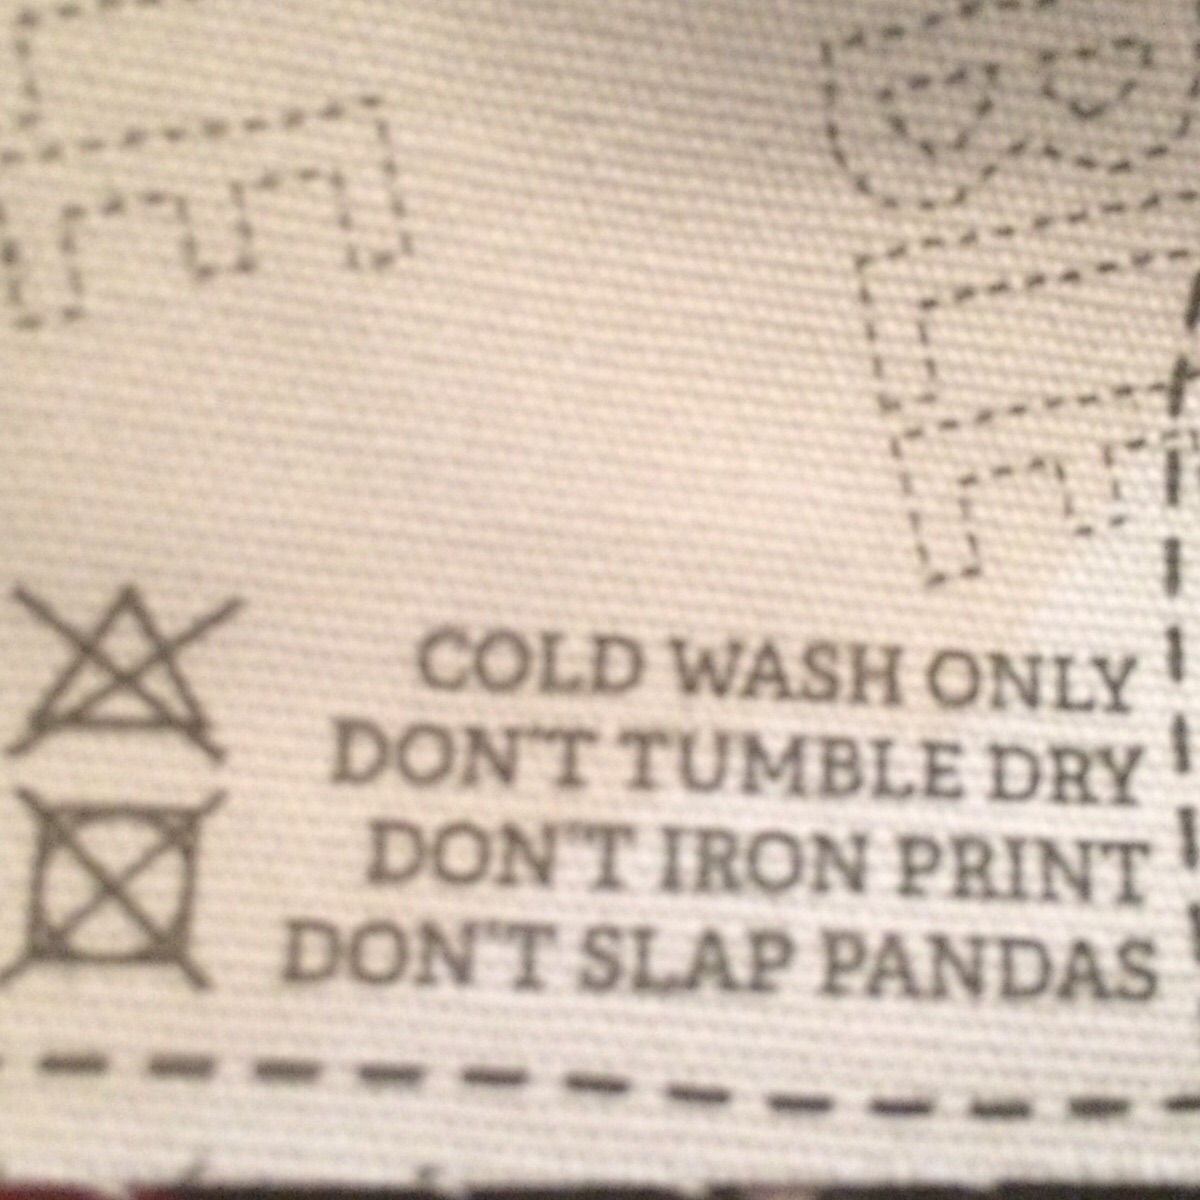 Important instructions for this Christmas.